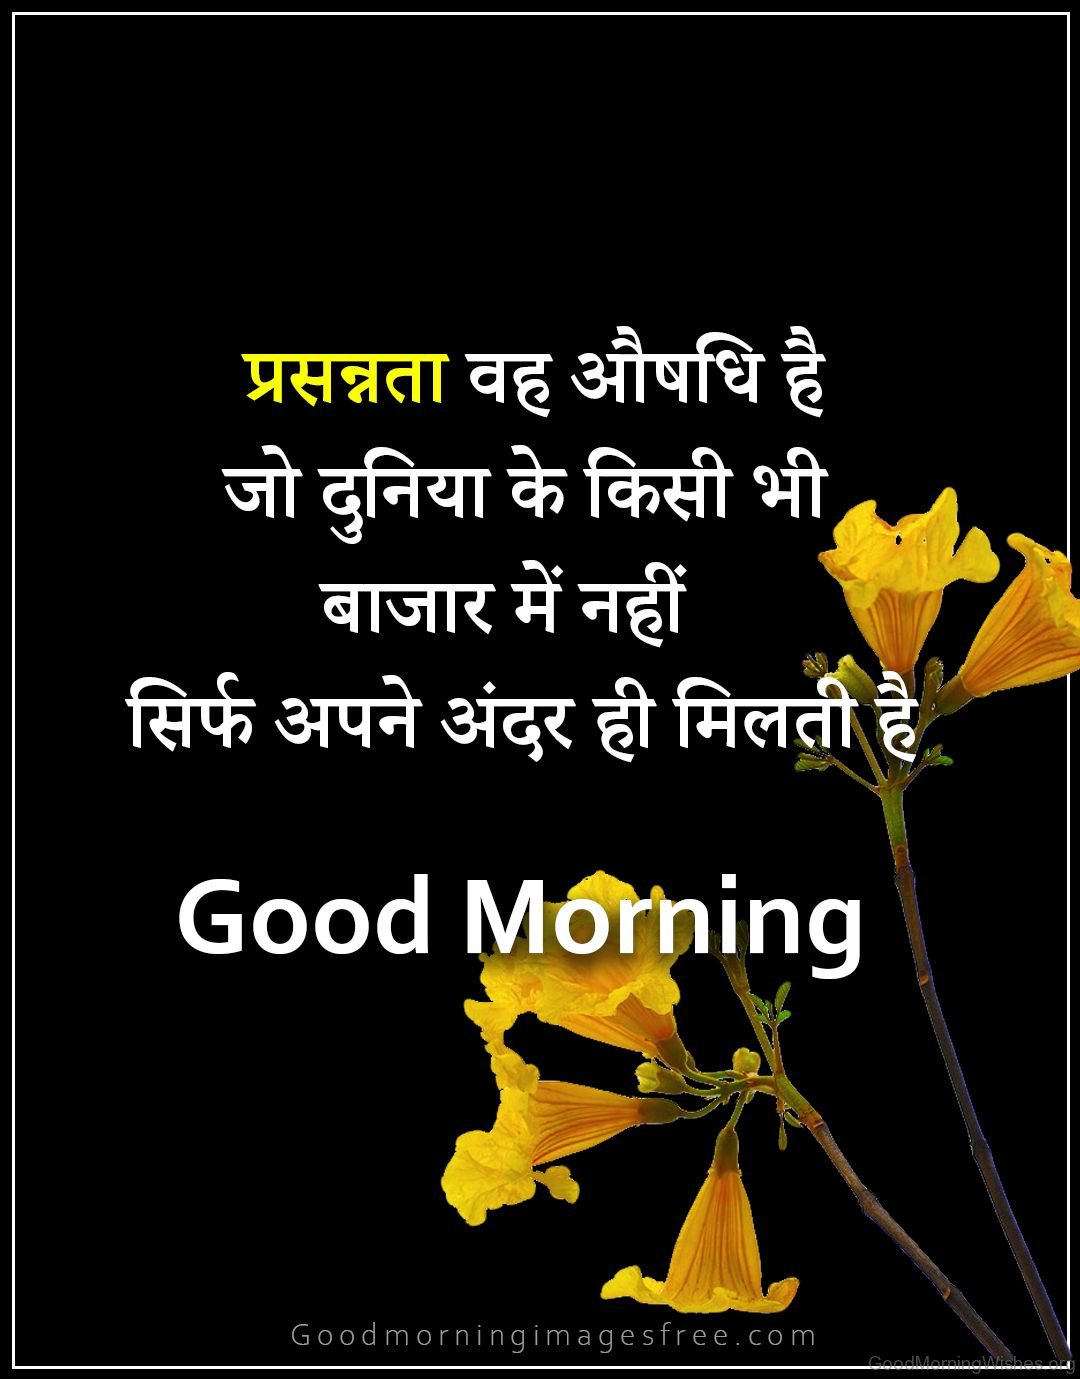 47 Incredible Good Morning Quotes in Hindi - Good Morning Wishes